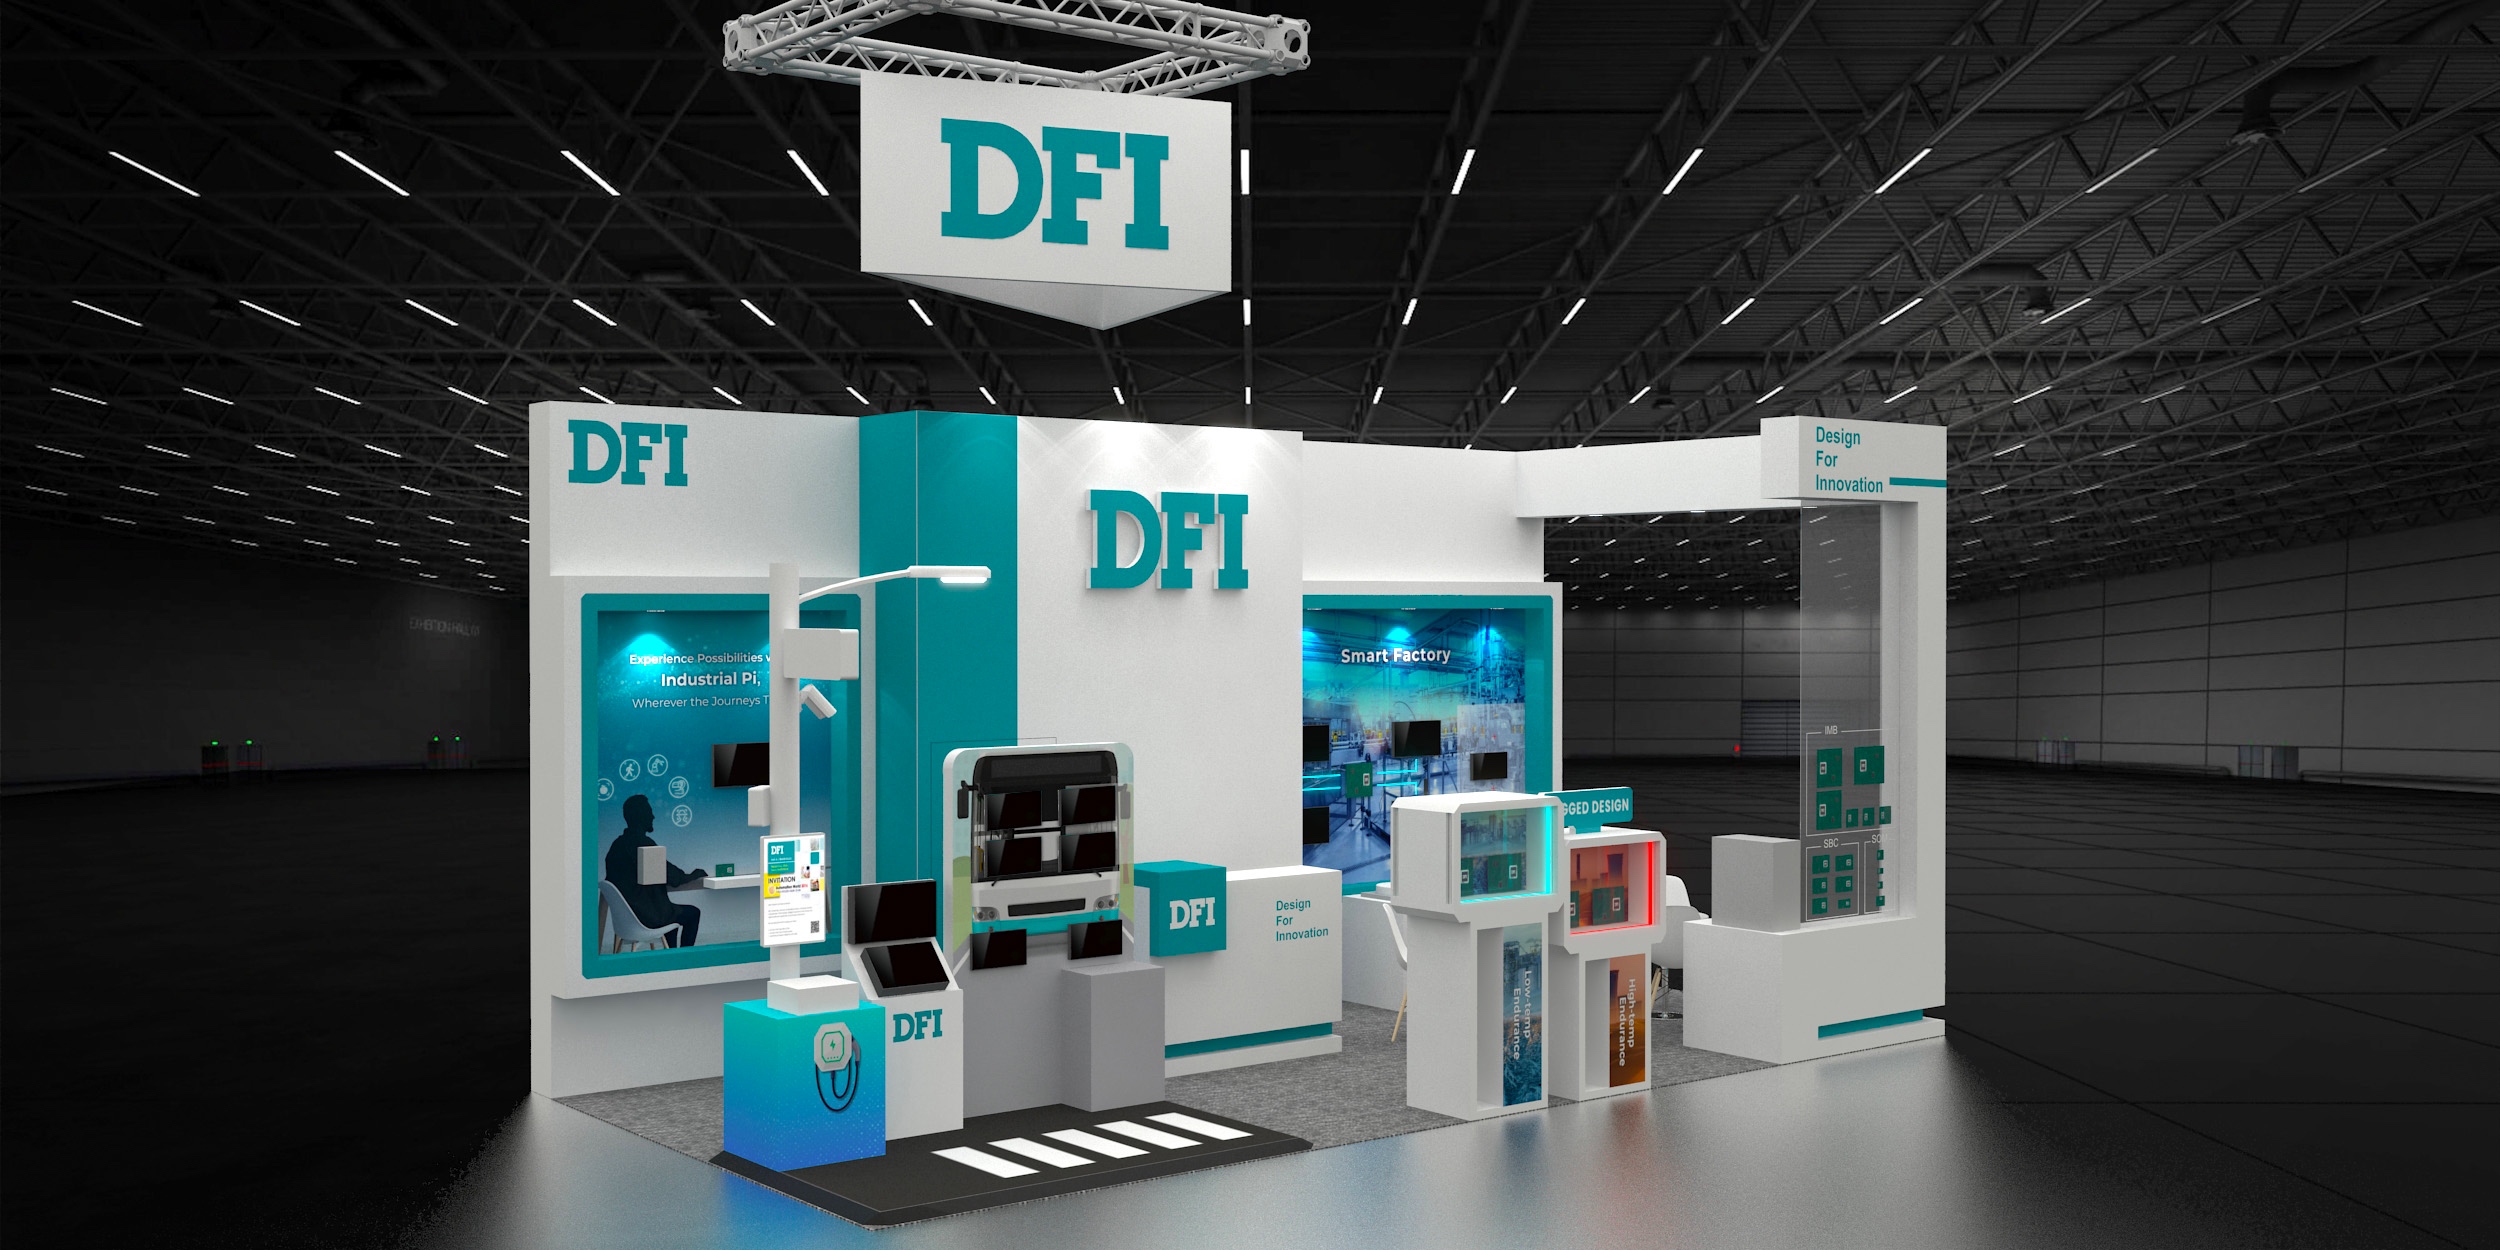 DFI To Showcase Latest Embedded Products and AIoT Solutions at Embedded World, Focusing on Edge AI Opportunities